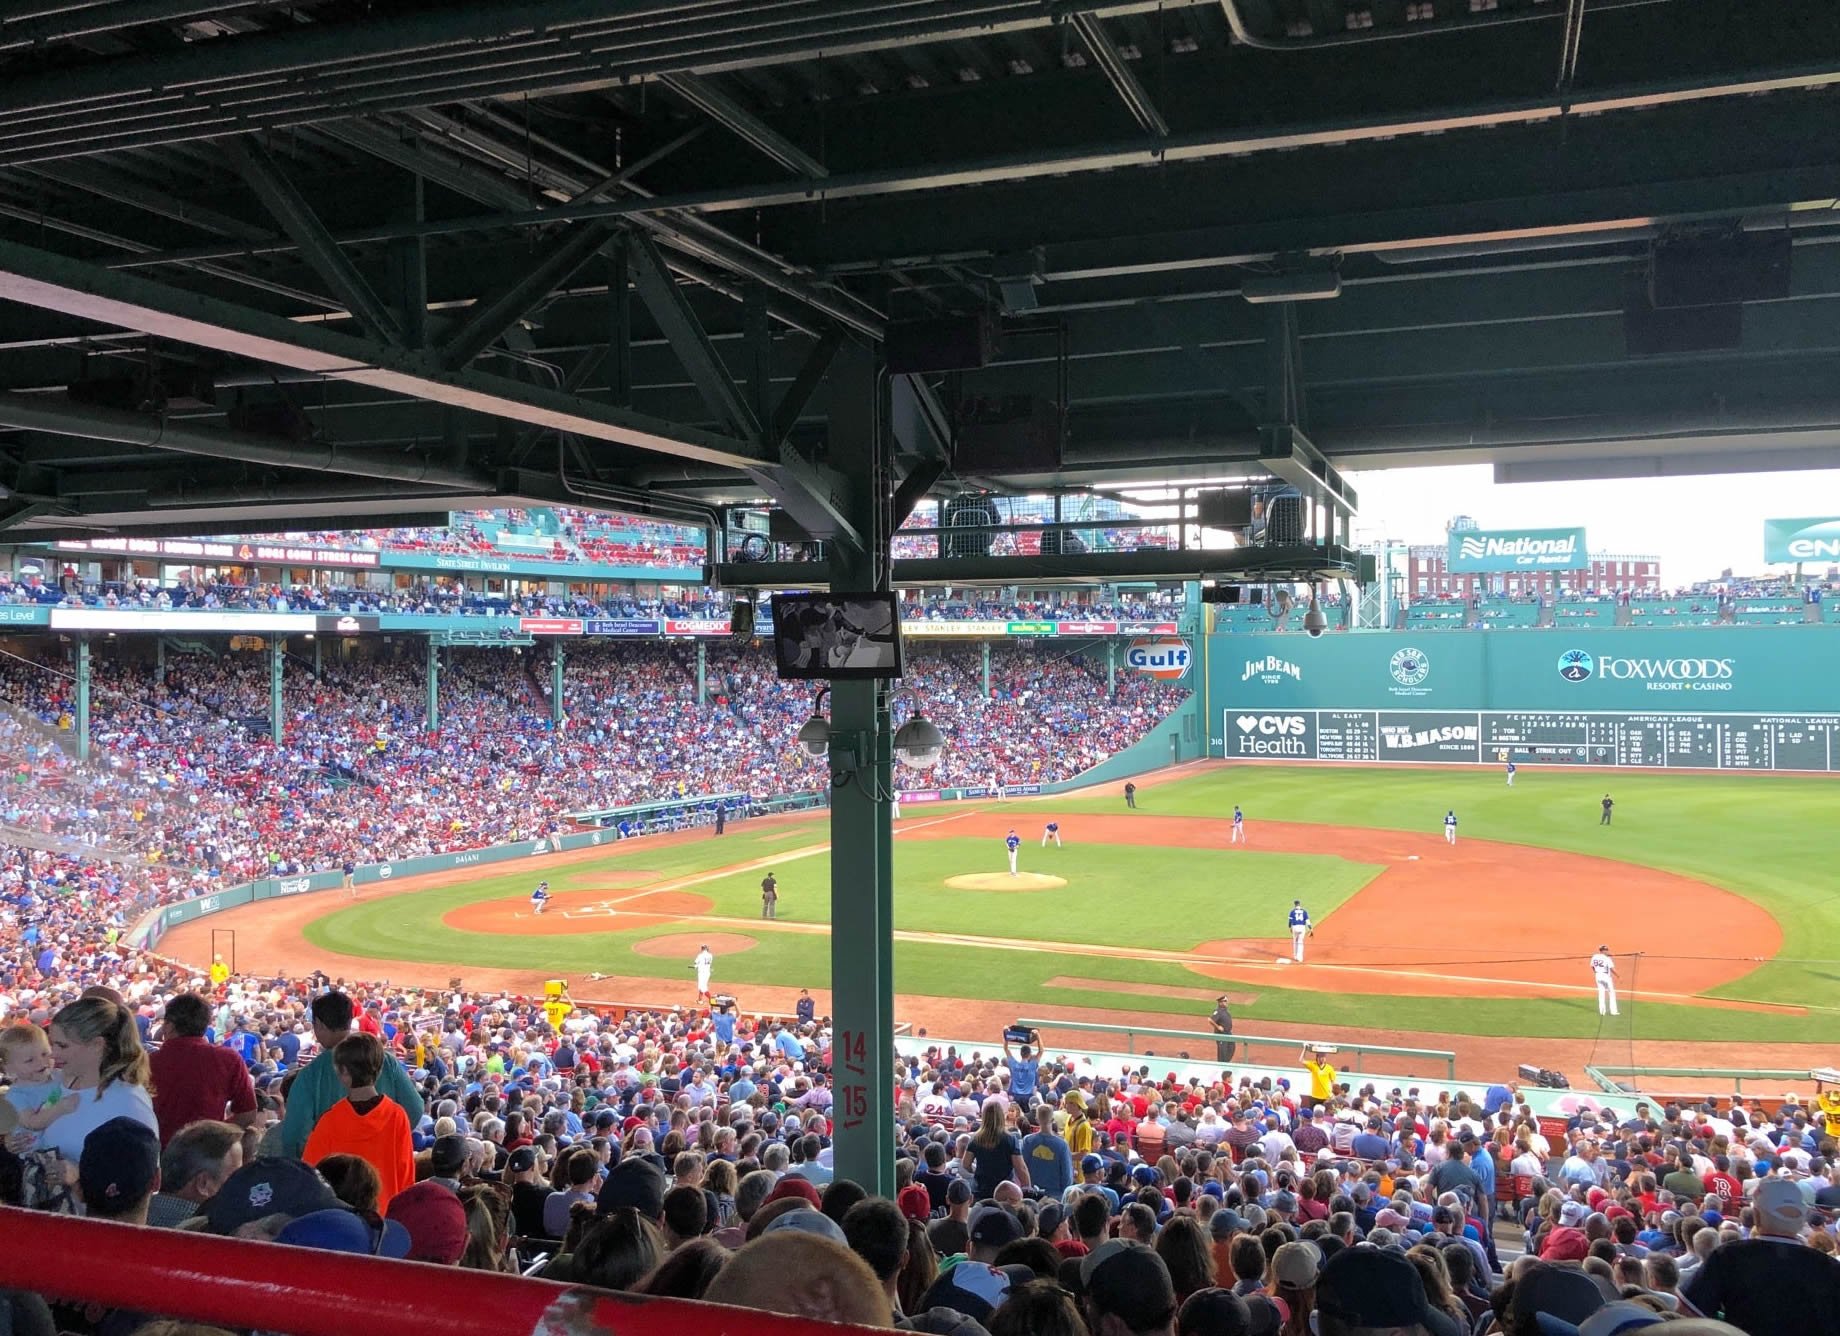 grandstand 14, row 18 seat view  for baseball - fenway park